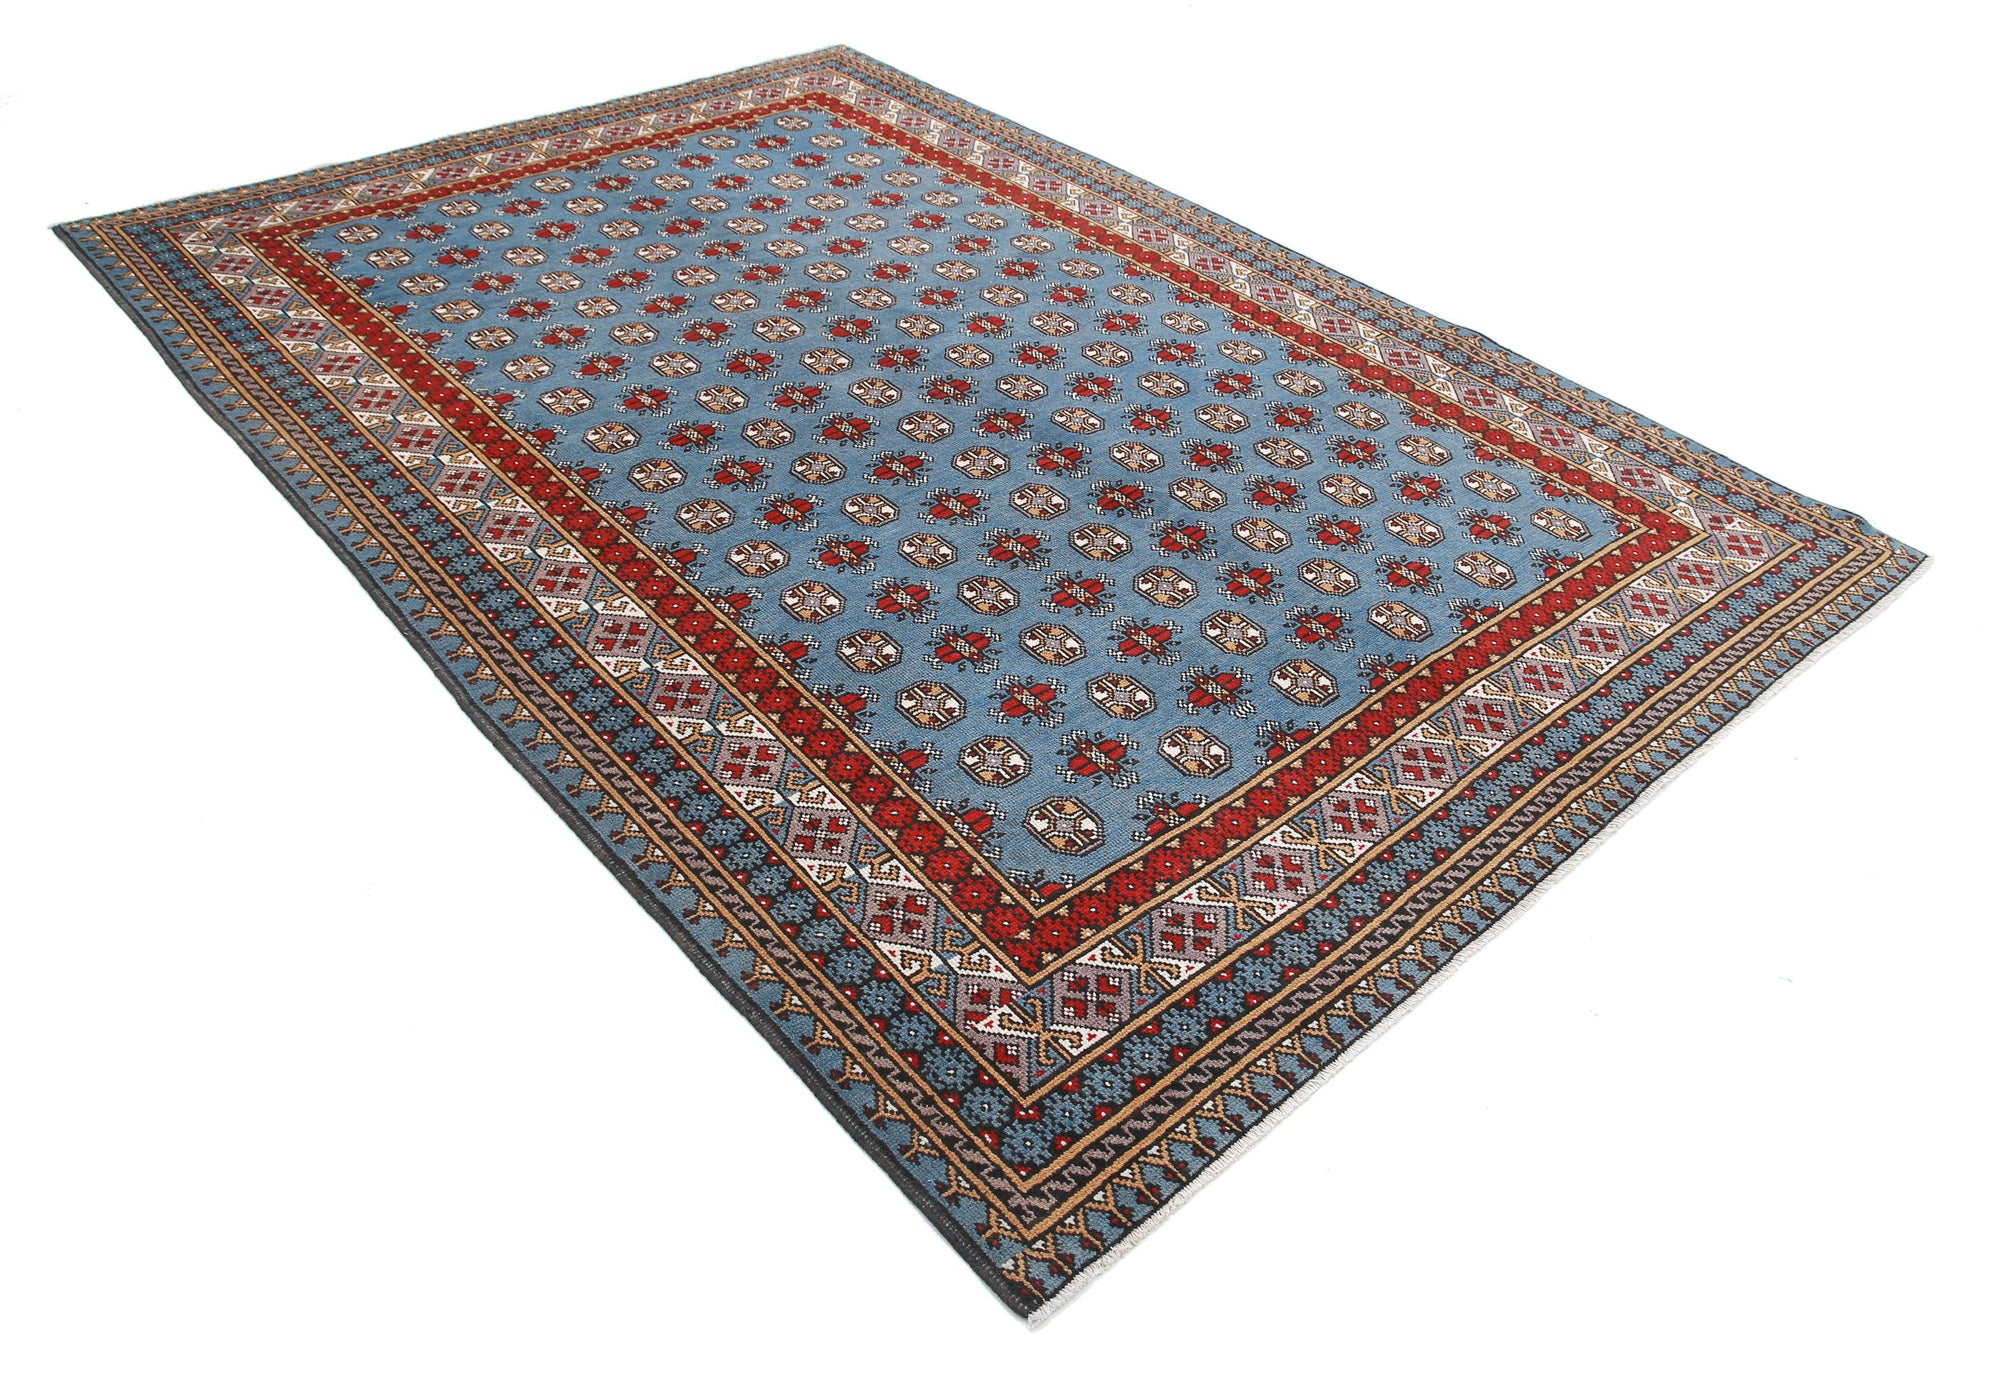 Revival-hand-knotted-gul-collection-wool-rug-5013976-1.jpg